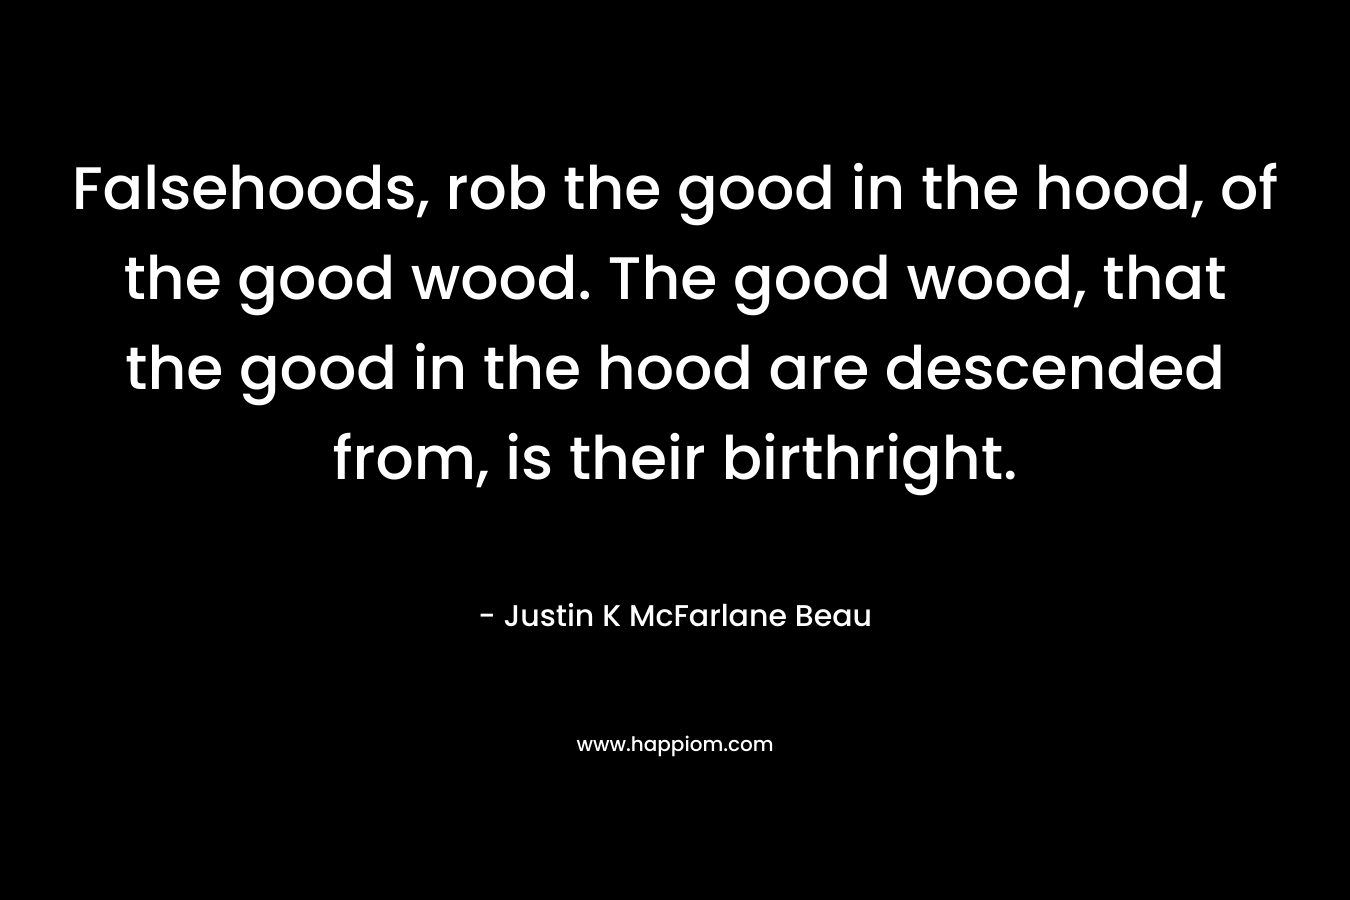 Falsehoods, rob the good in the hood, of the good wood. The good wood, that the good in the hood are descended from, is their birthright. – Justin K McFarlane Beau